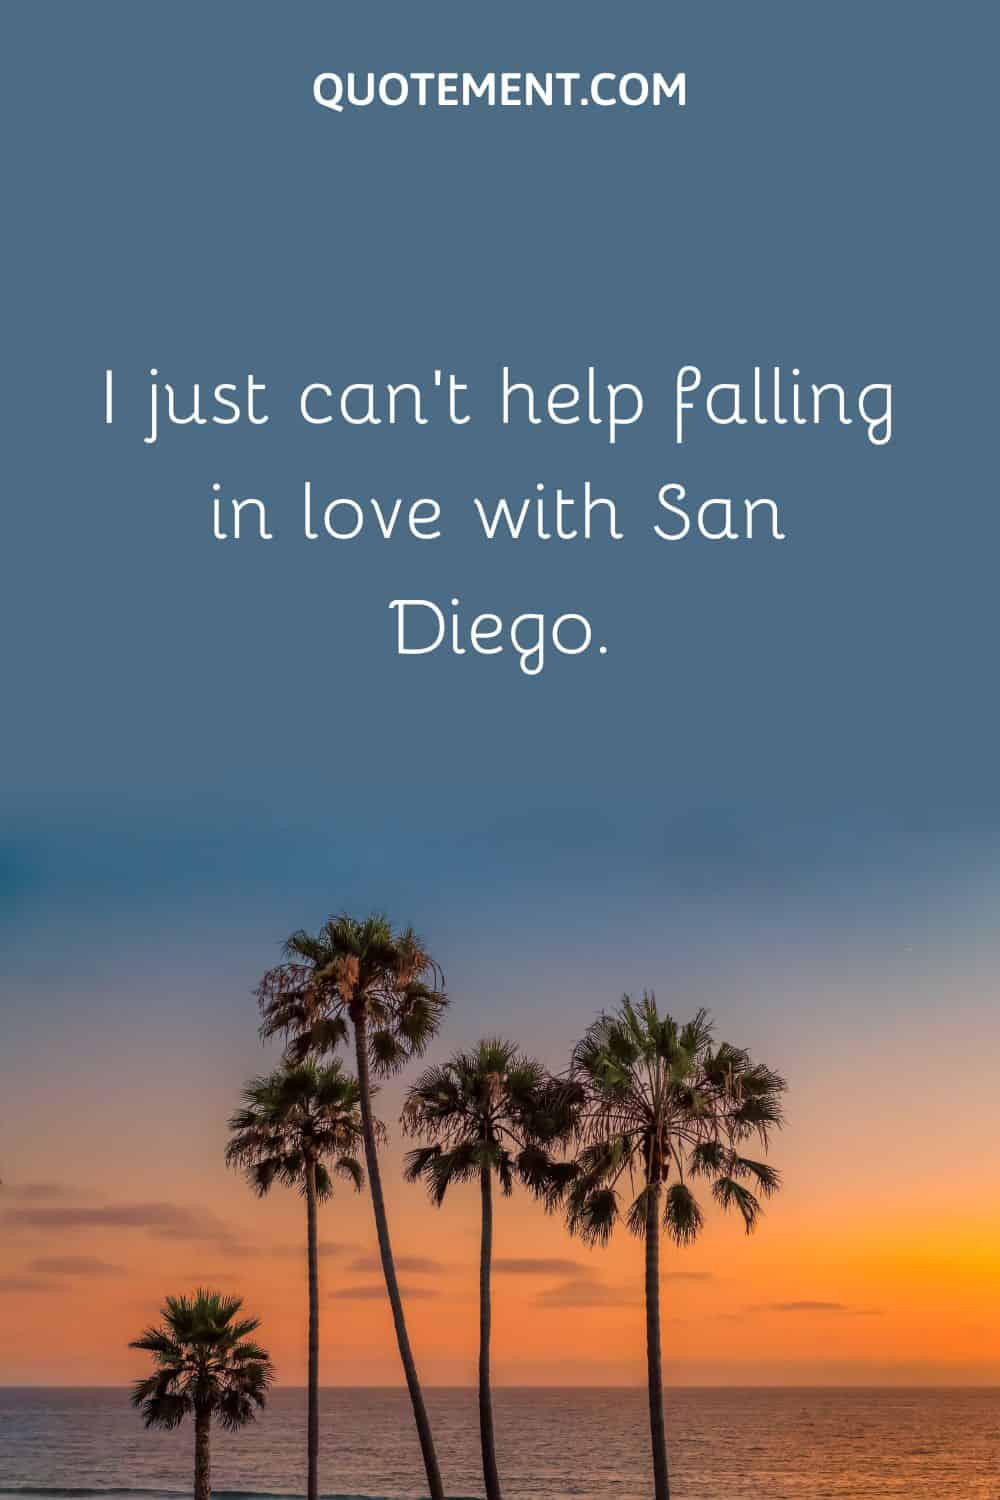 I just can’t help falling in love with San Diego